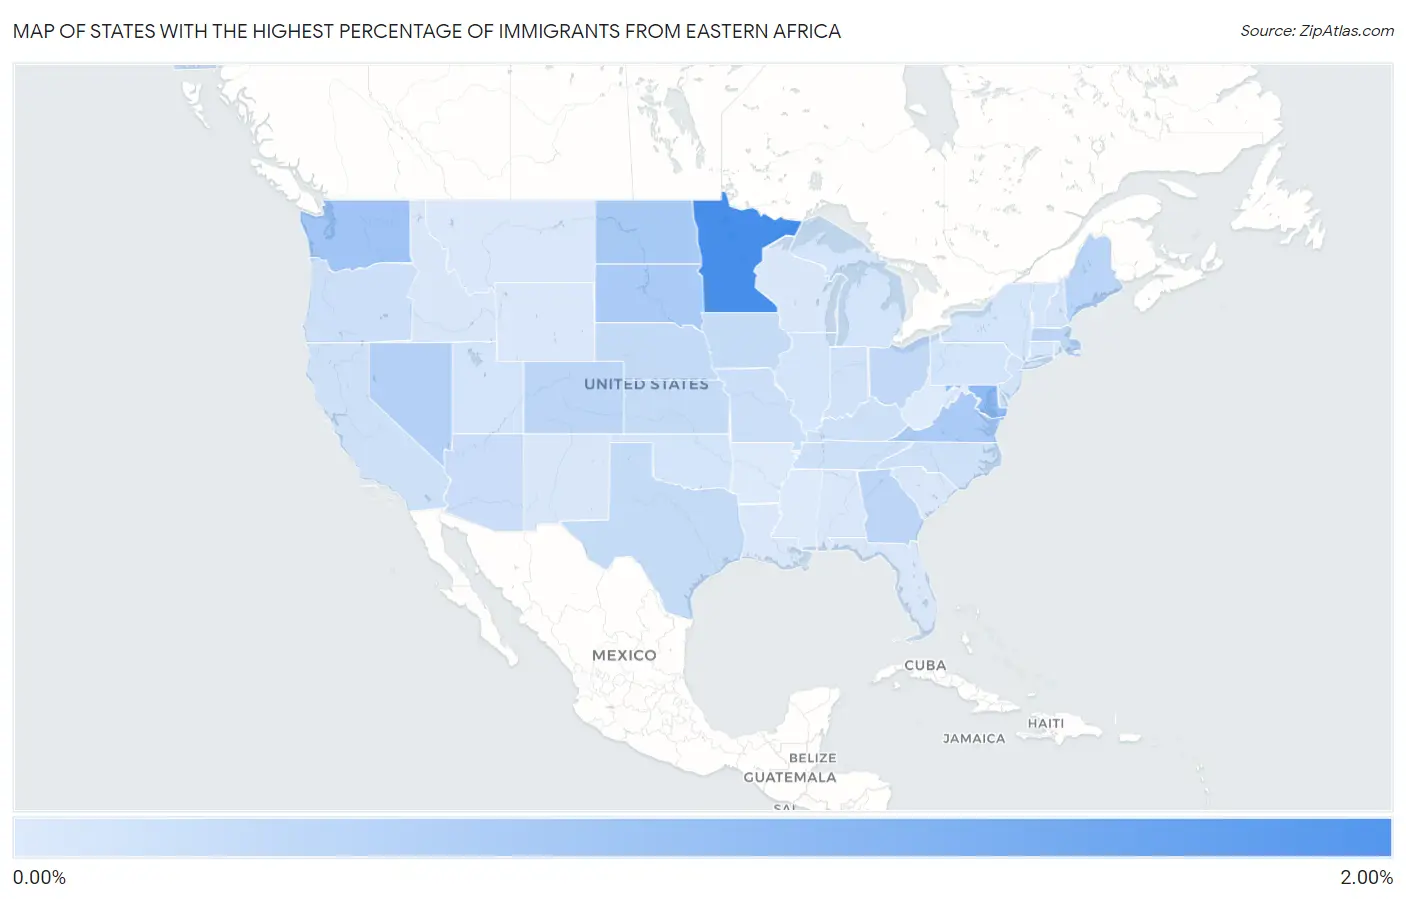 States with the Highest Percentage of Immigrants from Eastern Africa in the United States Map